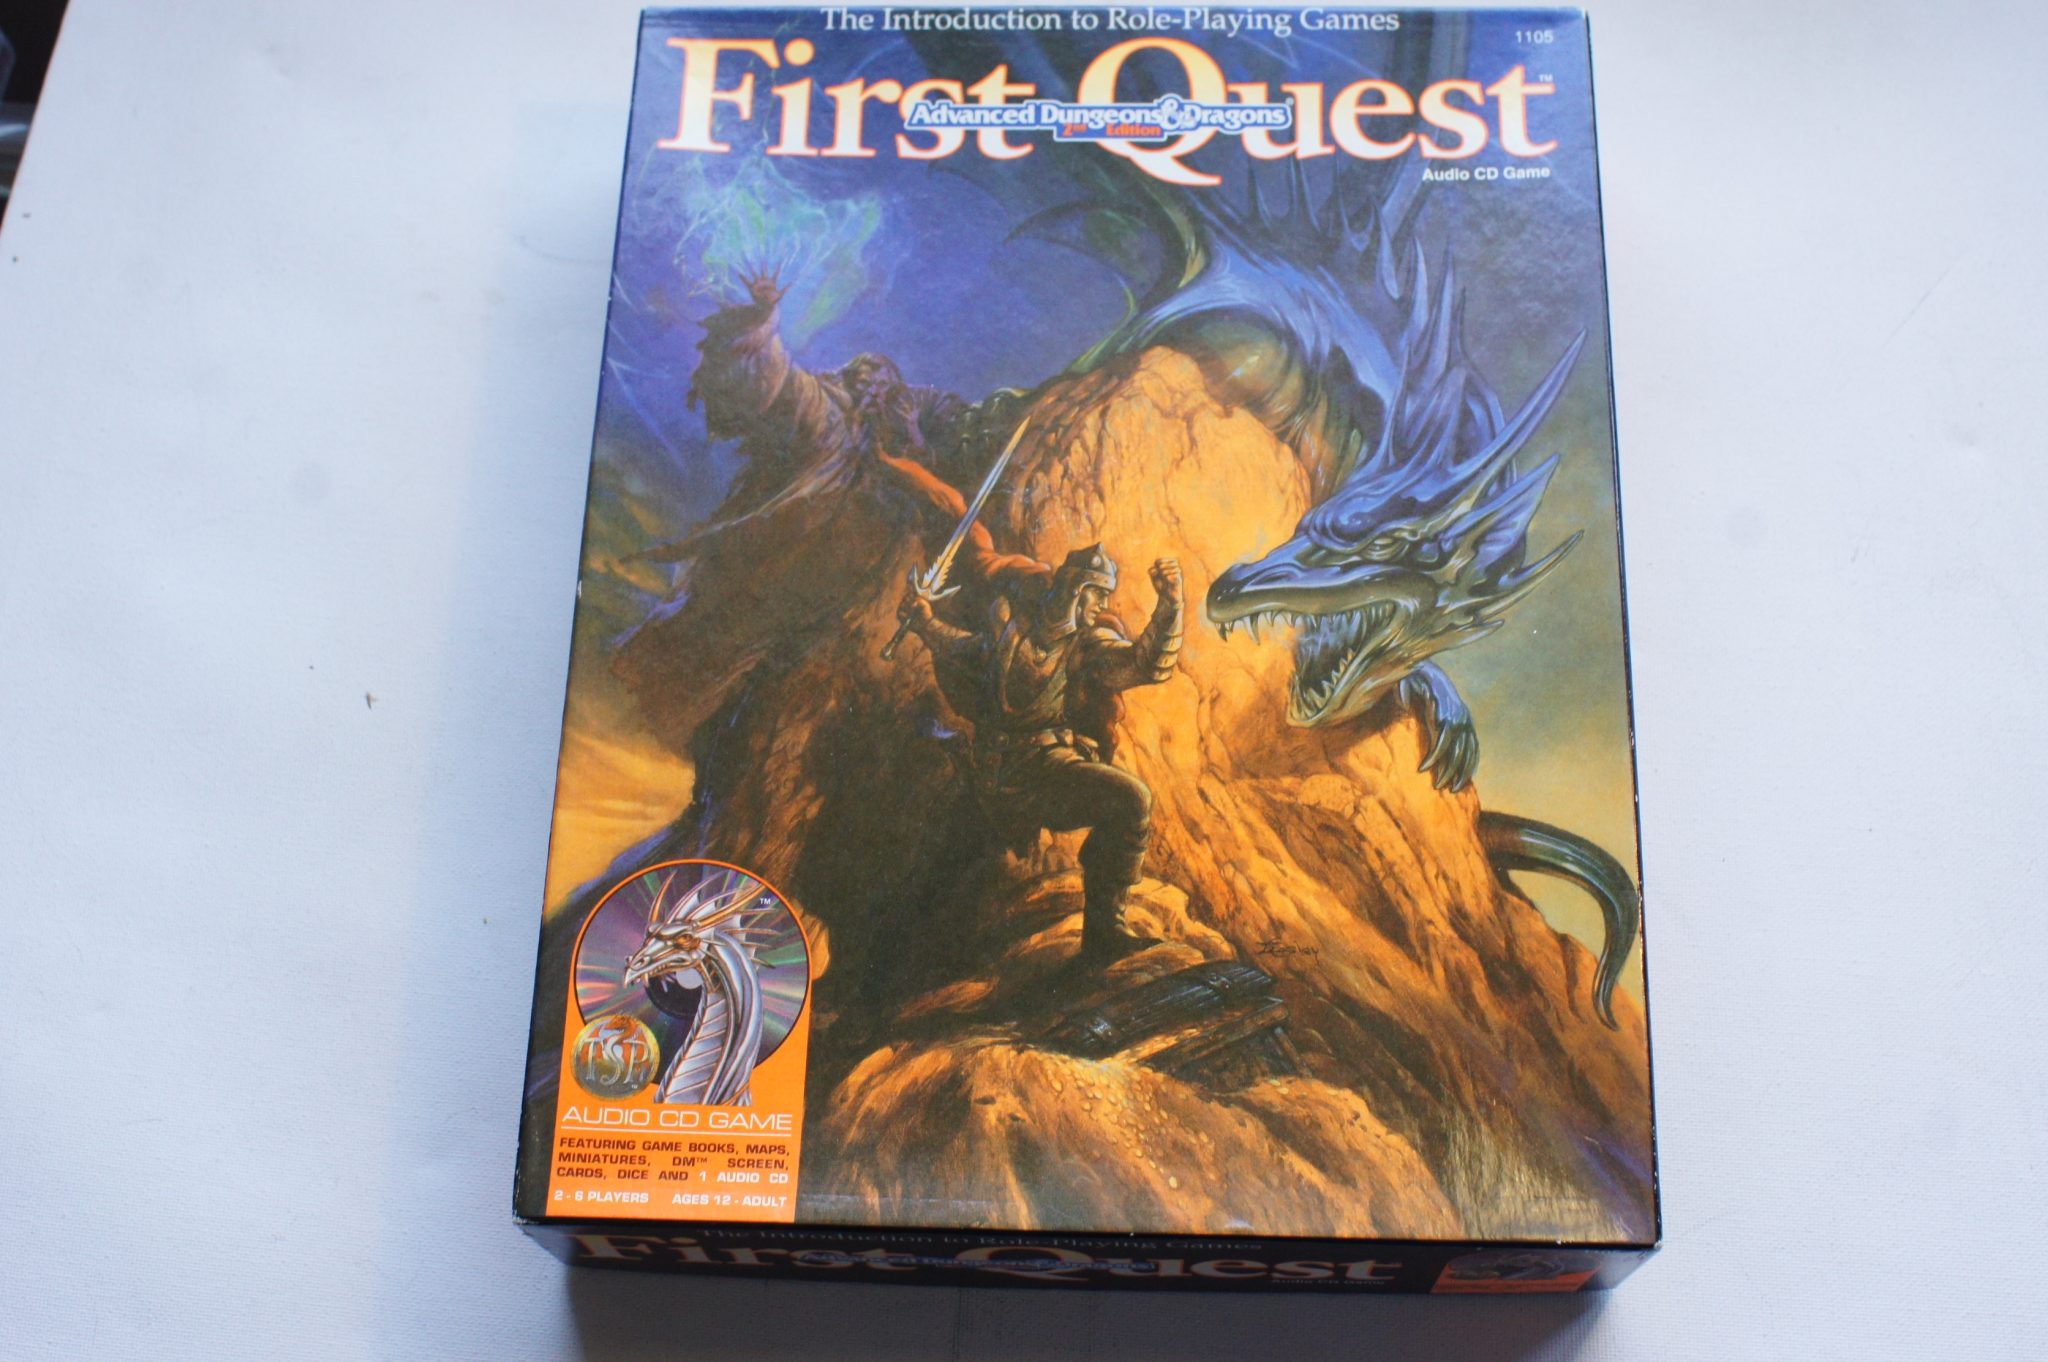 First Quest, boxed 'Introduction to Role-Playing Games' for AD&D 2nd ed ...